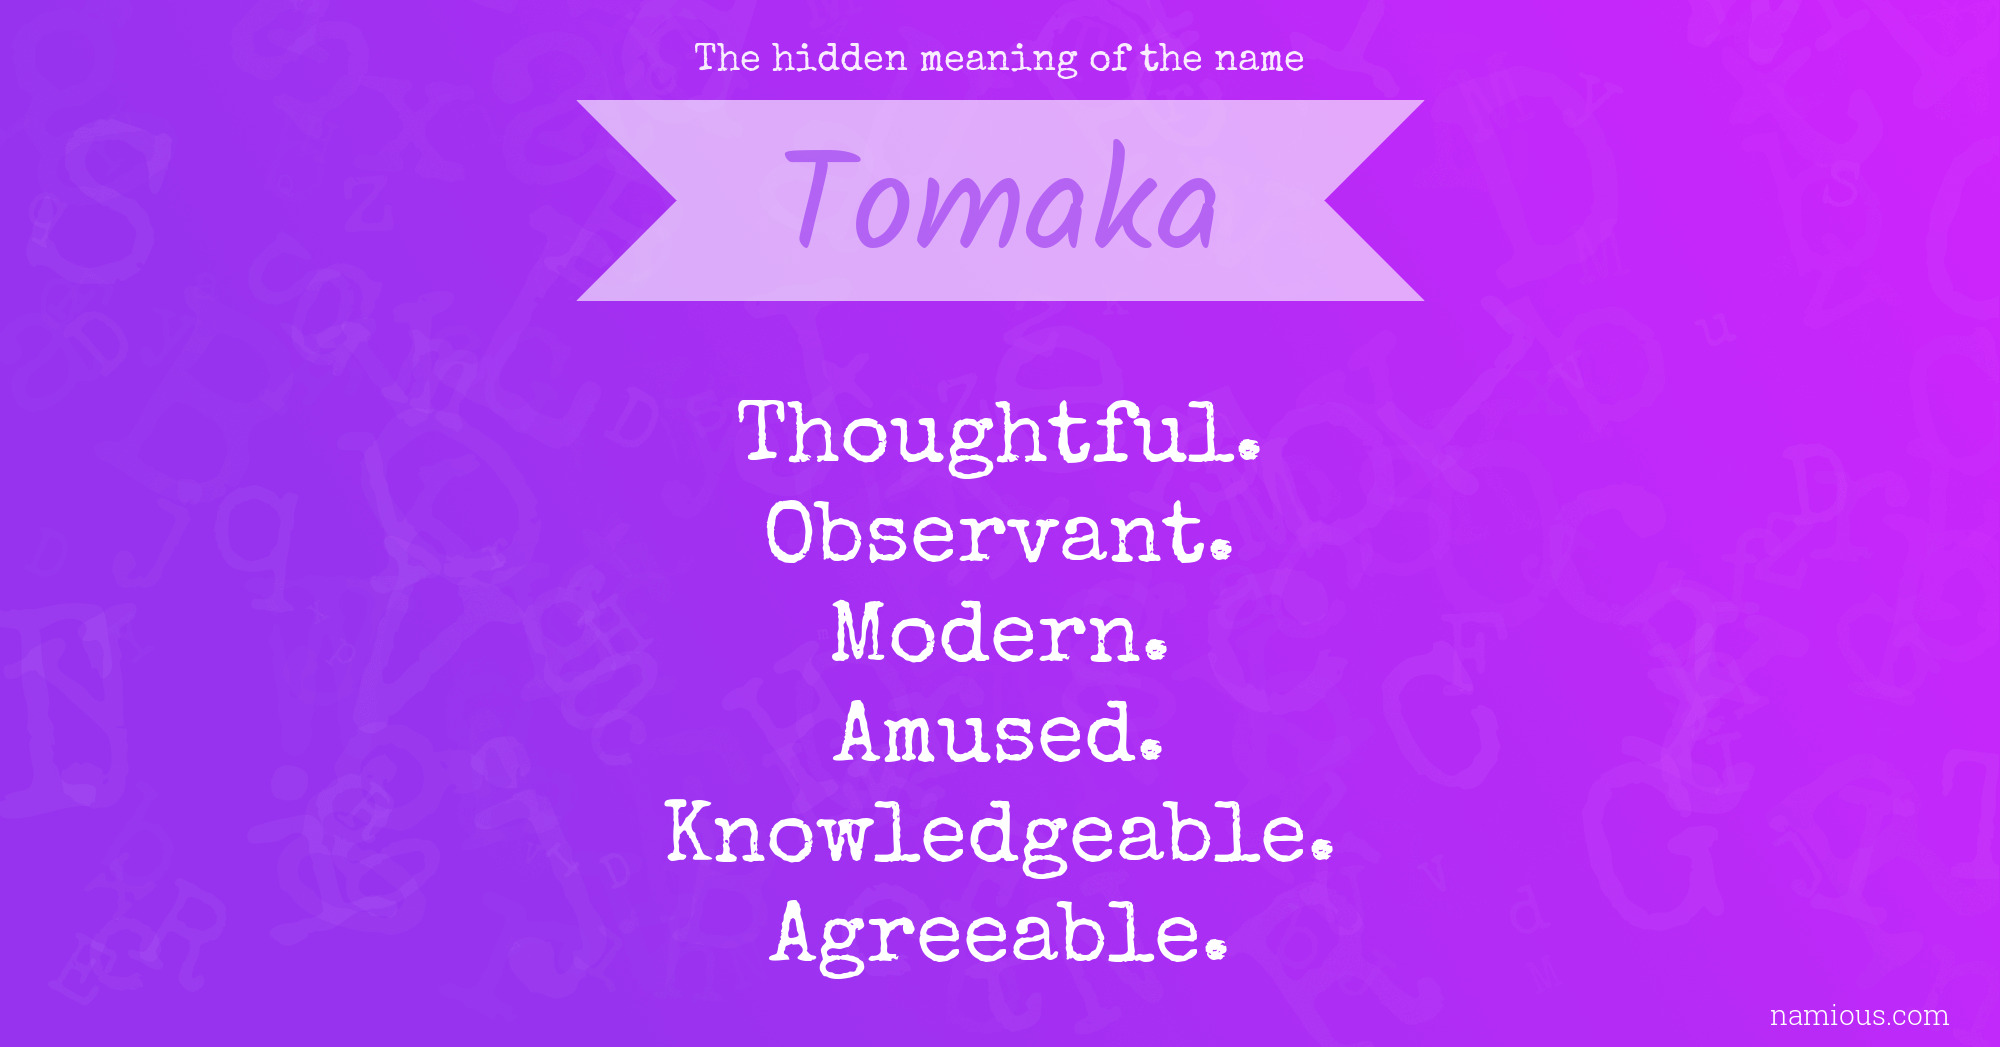 The hidden meaning of the name Tomaka